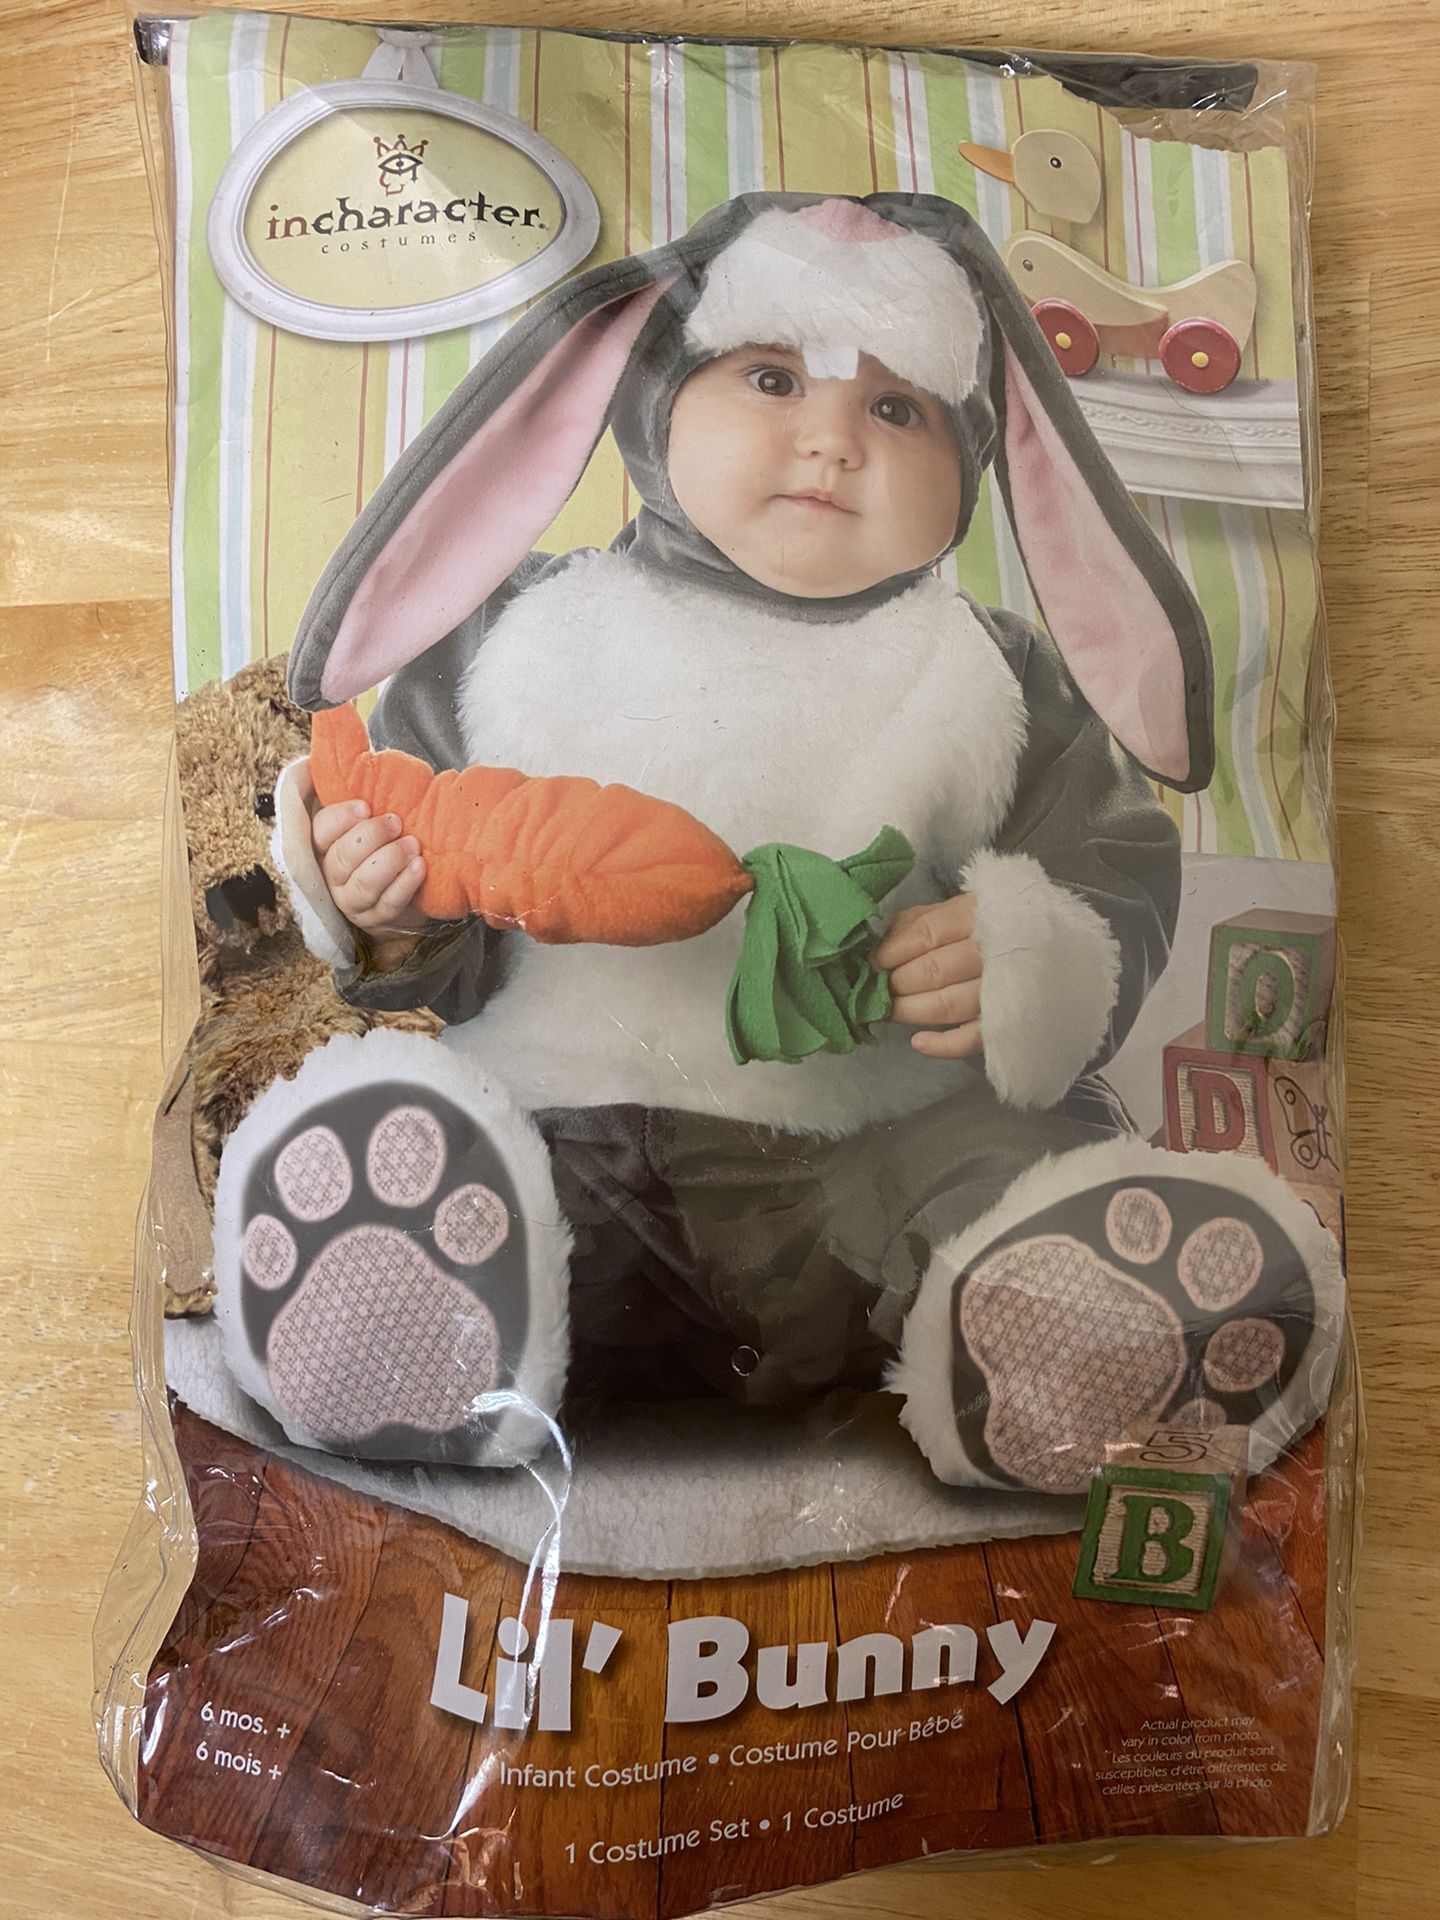 Lil Bunny costume infant 6months+ Not Free. Message for price